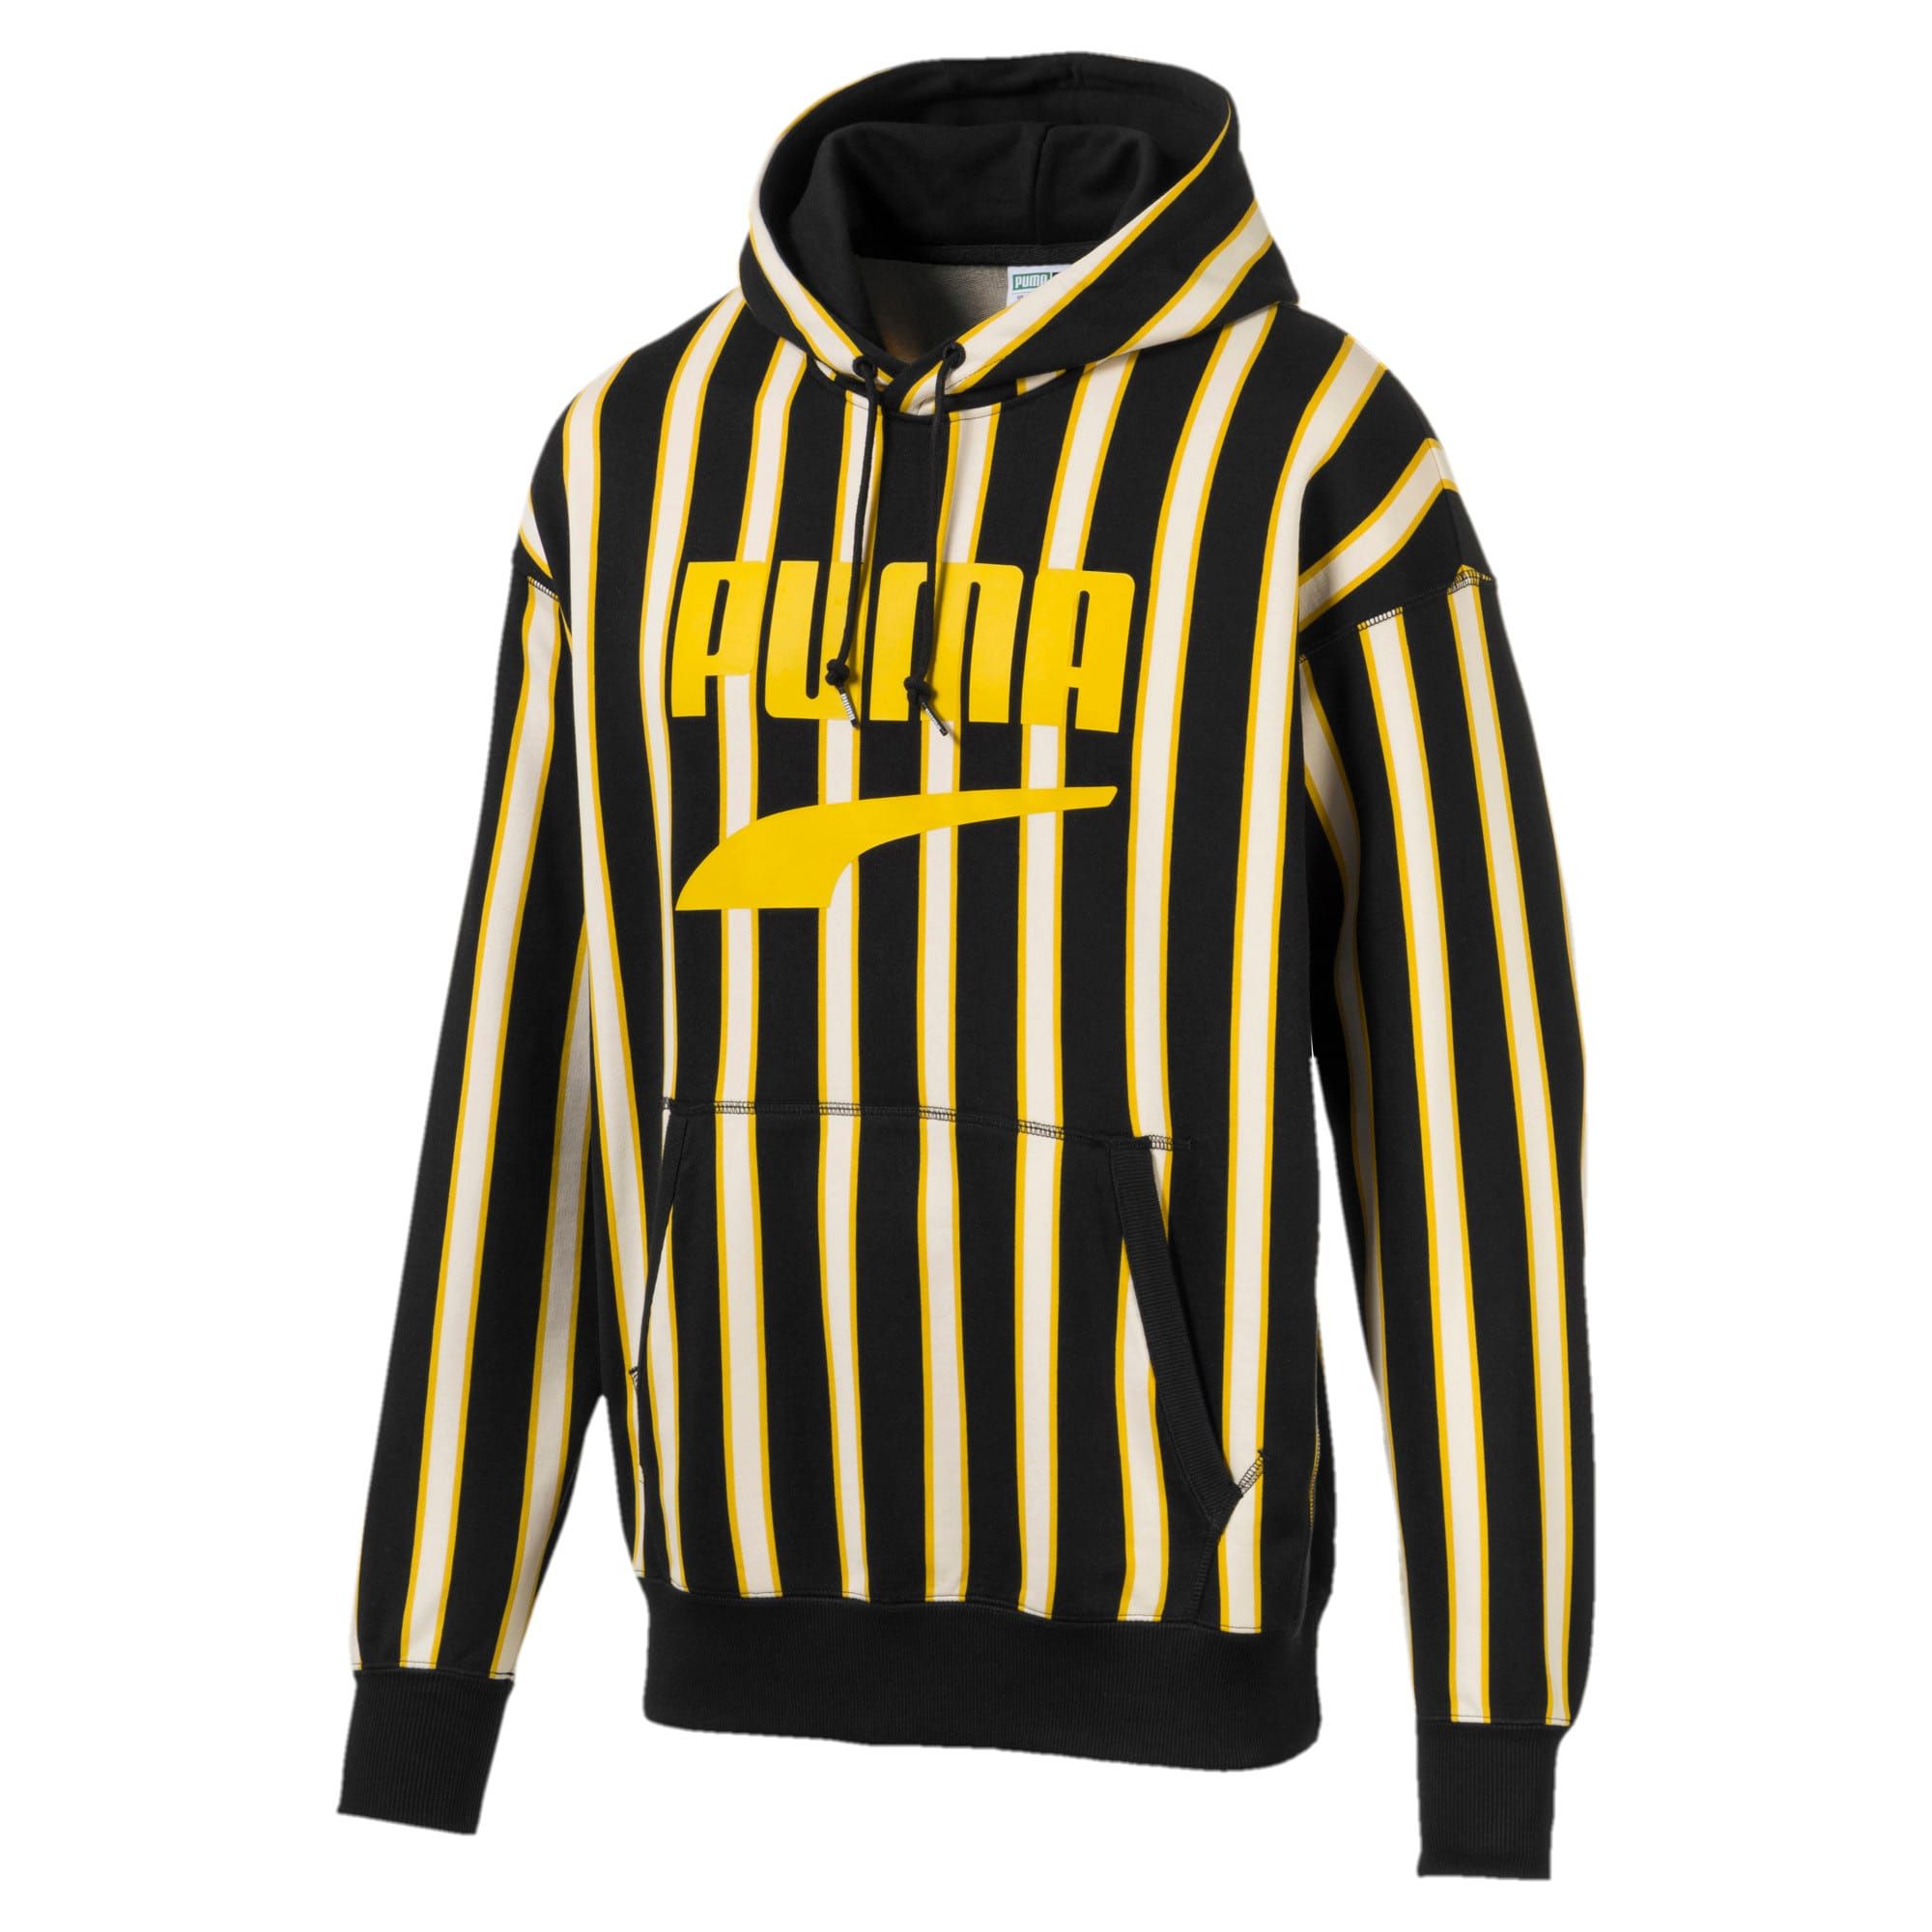 PUMA Downtown Po Graphic Men’s Hoodie in Black/AOP size X Small